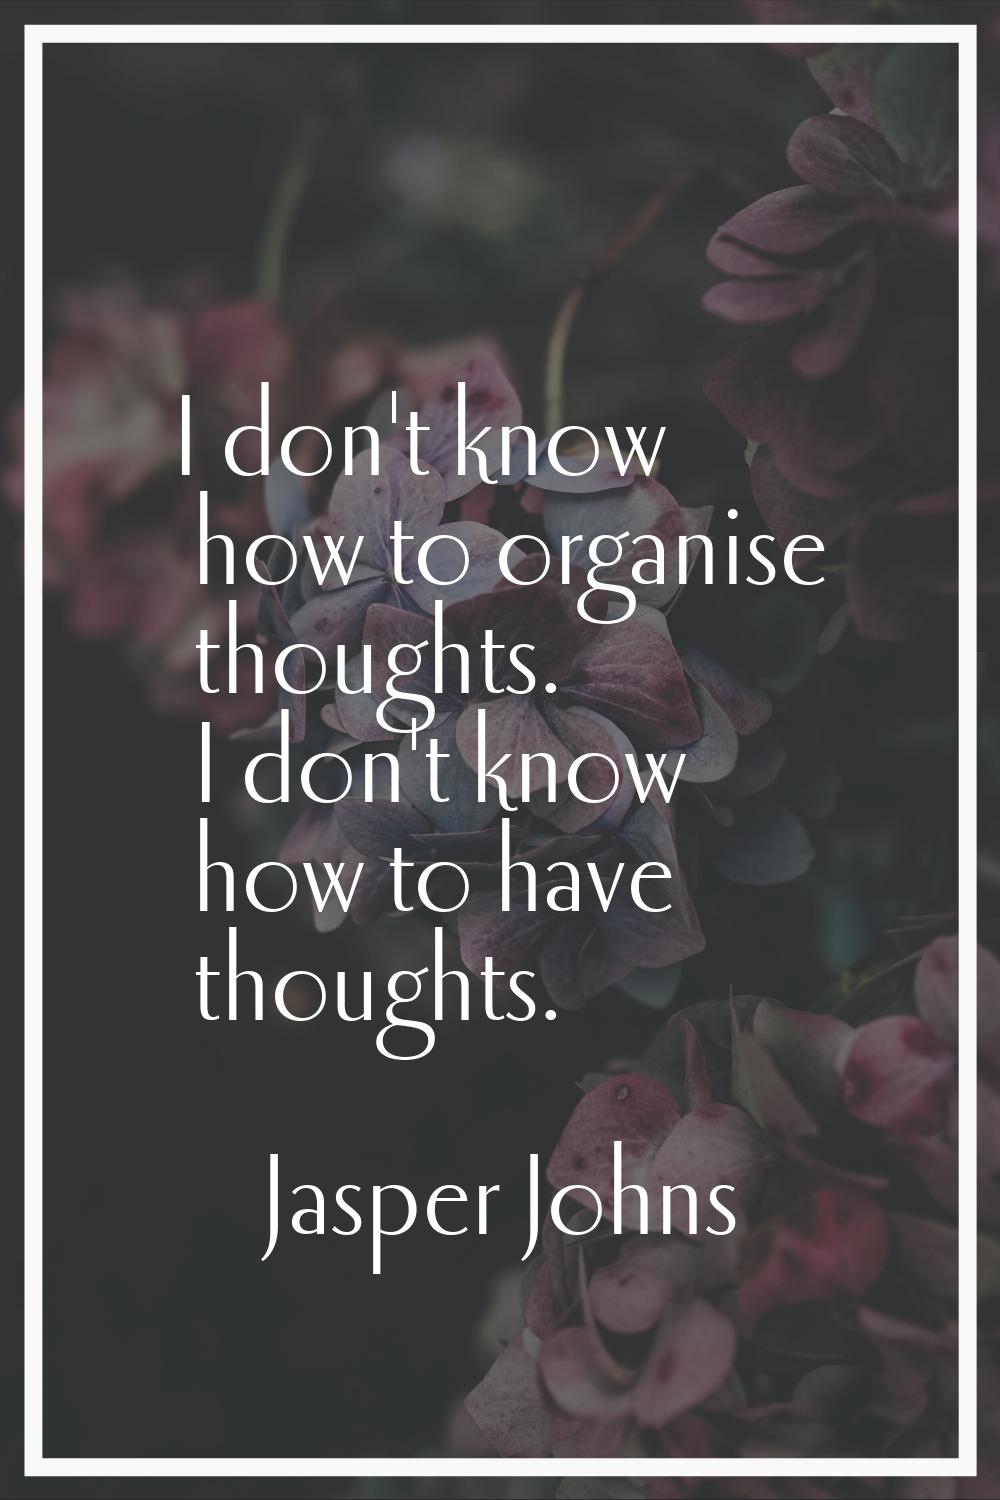 I don't know how to organise thoughts. I don't know how to have thoughts.